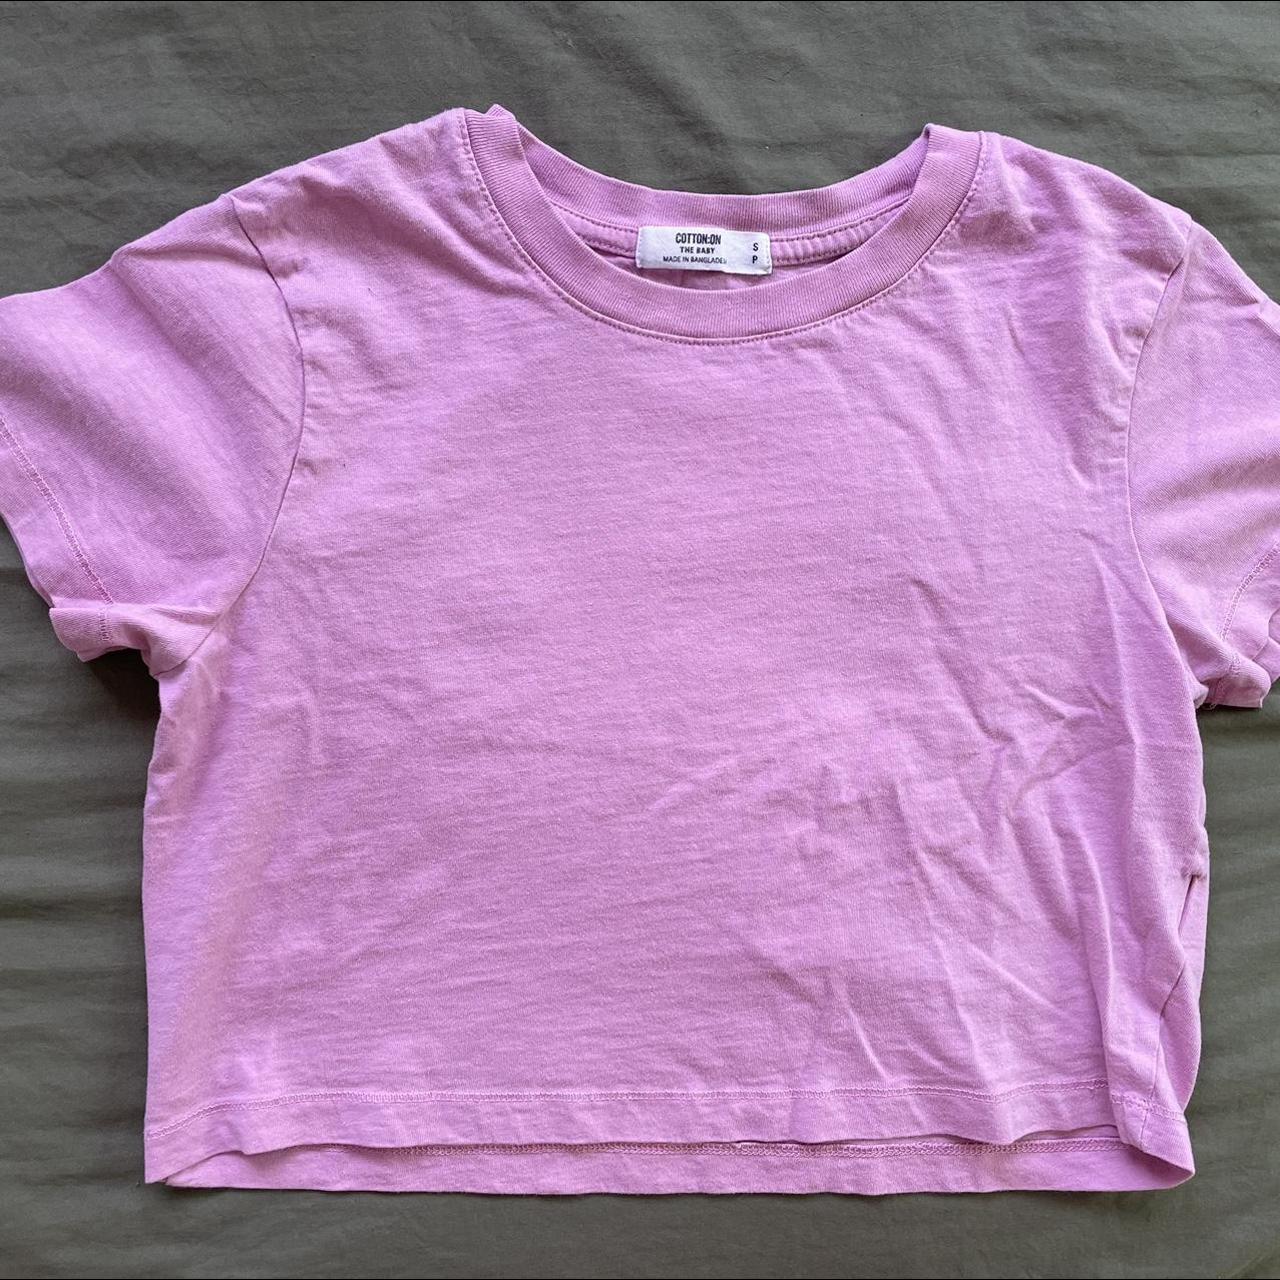 Cotton On Women's Pink and Brown T-shirt (2)